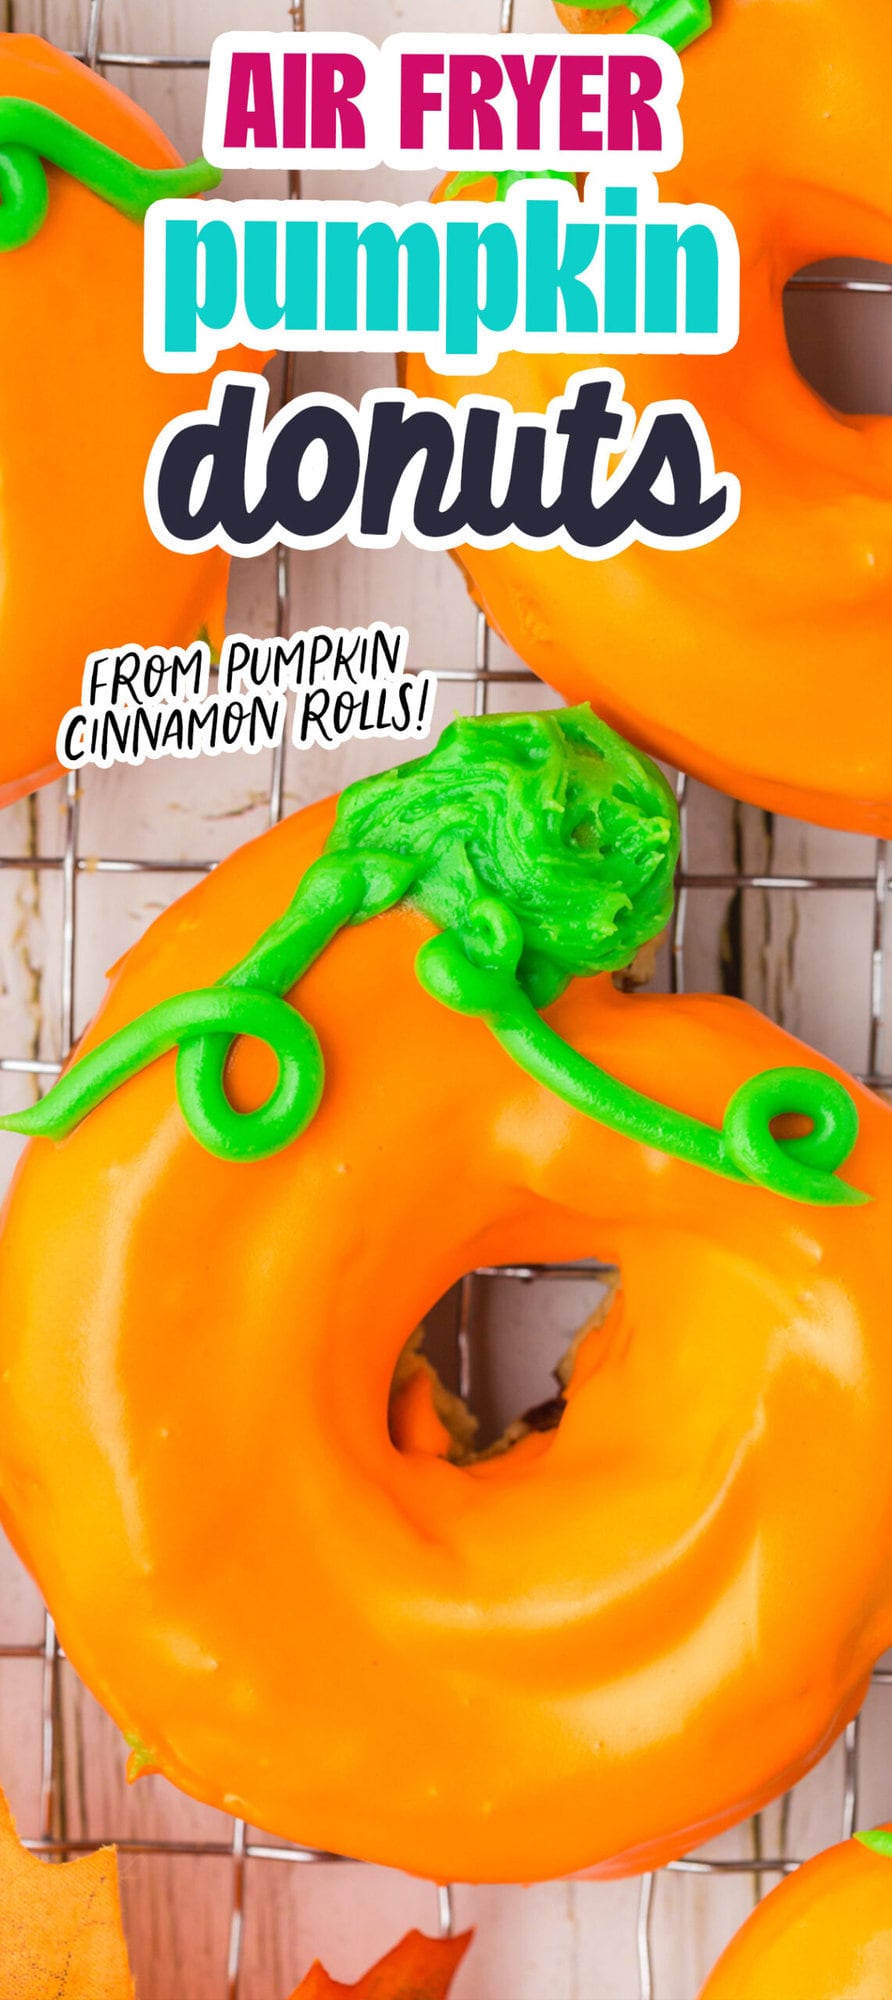 donuts glazed in orange frosting with green leaves and tendrils on top to look like a pumpkin